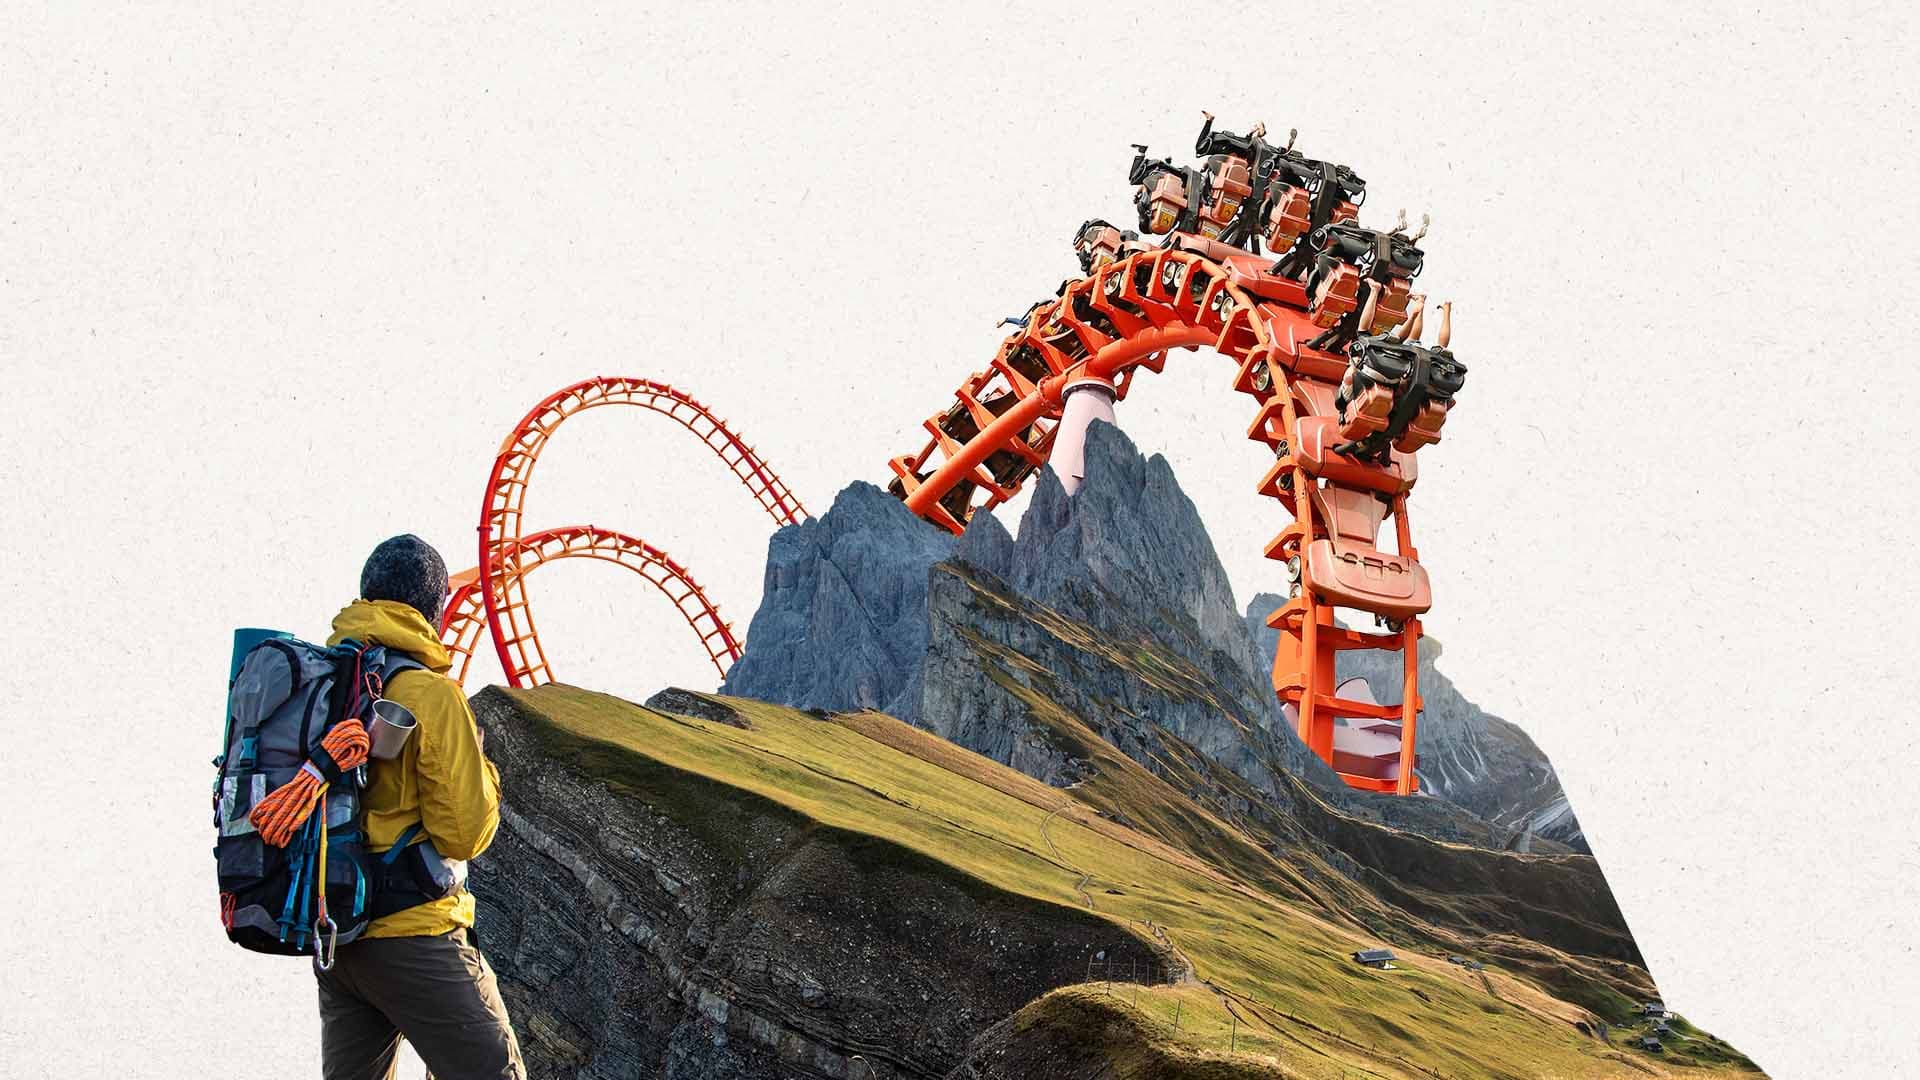 Person exploring a landscape with a rollercoaster stretching across it.